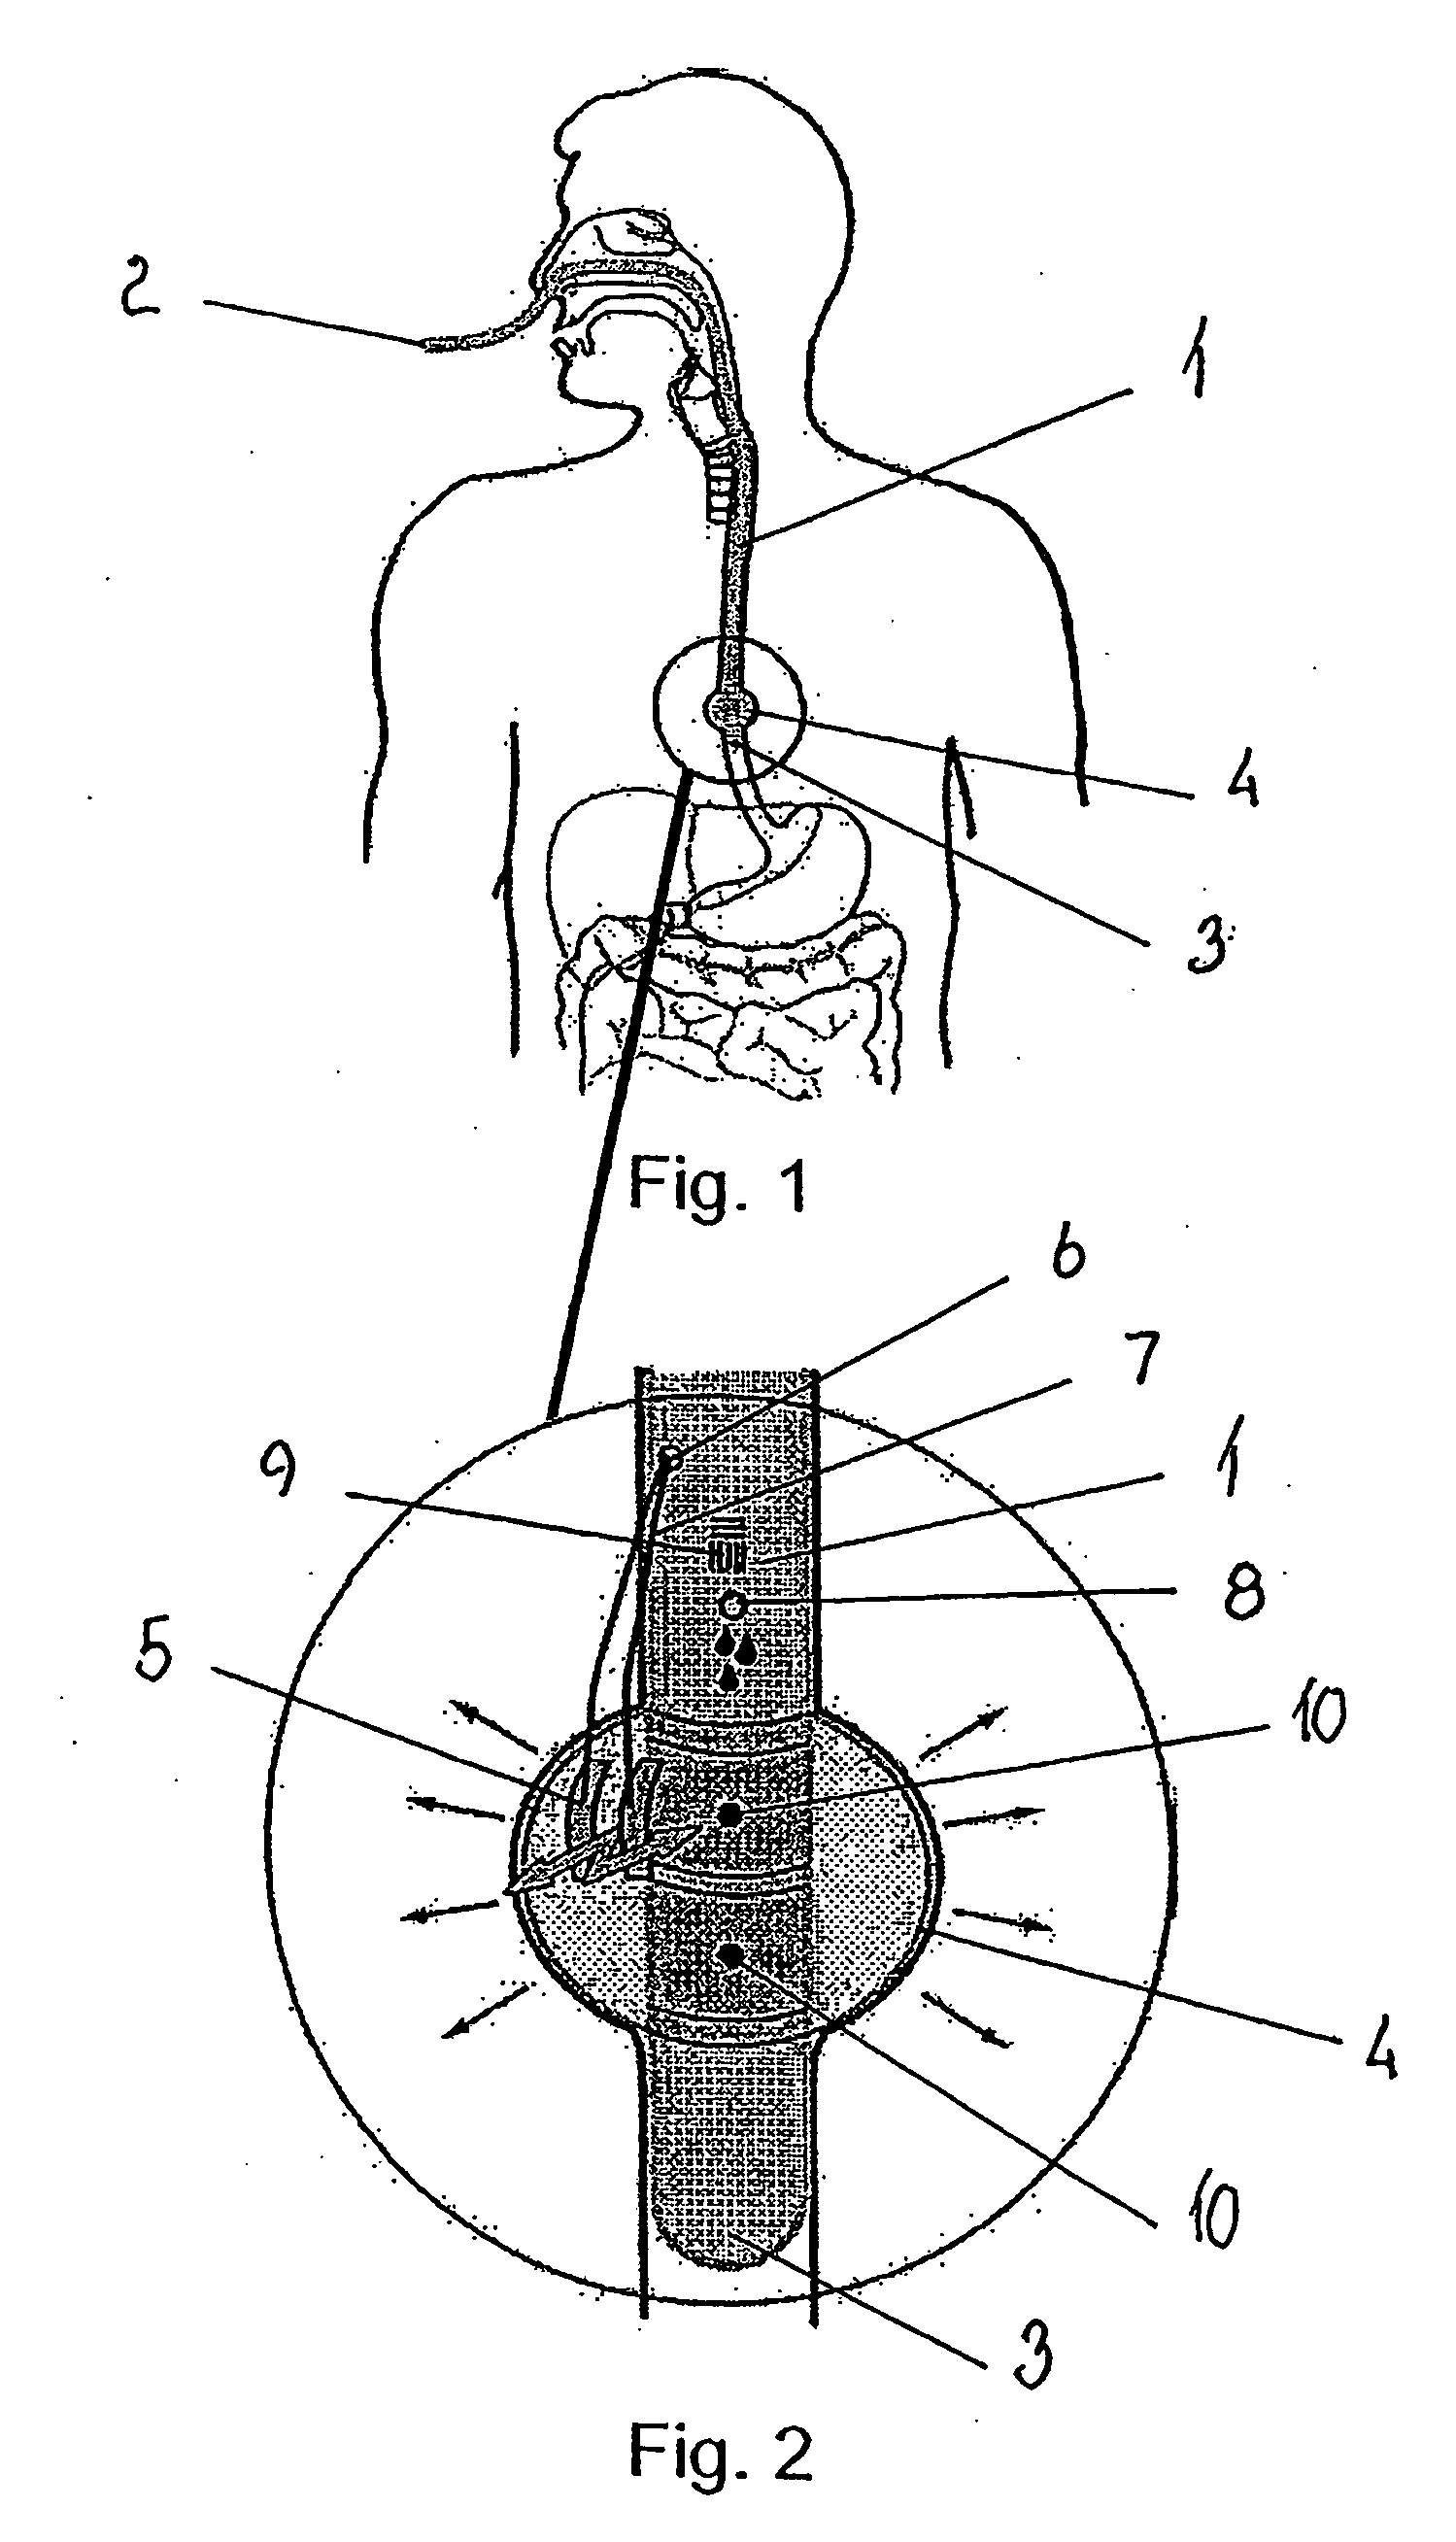 Method and apparatus for stimulating a bodily hollow system and method and apparatus for measuring reactions to stimuli of such system